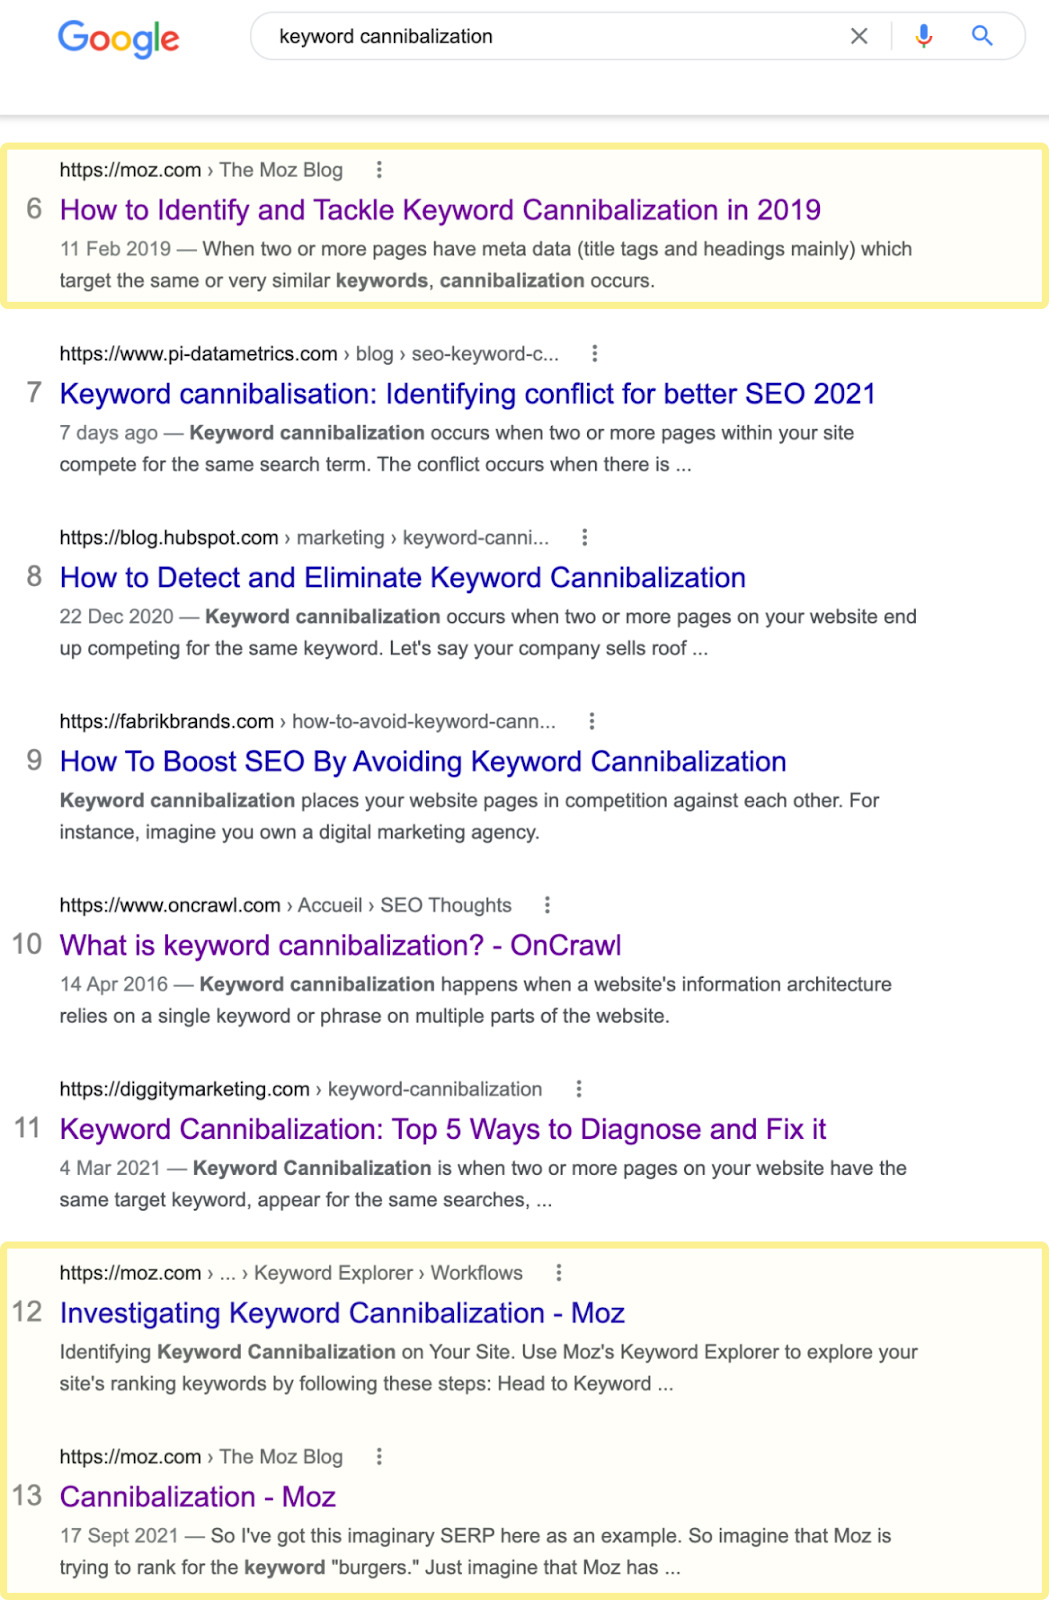 Unfiltered Google results for 'keyword cannibalization' 